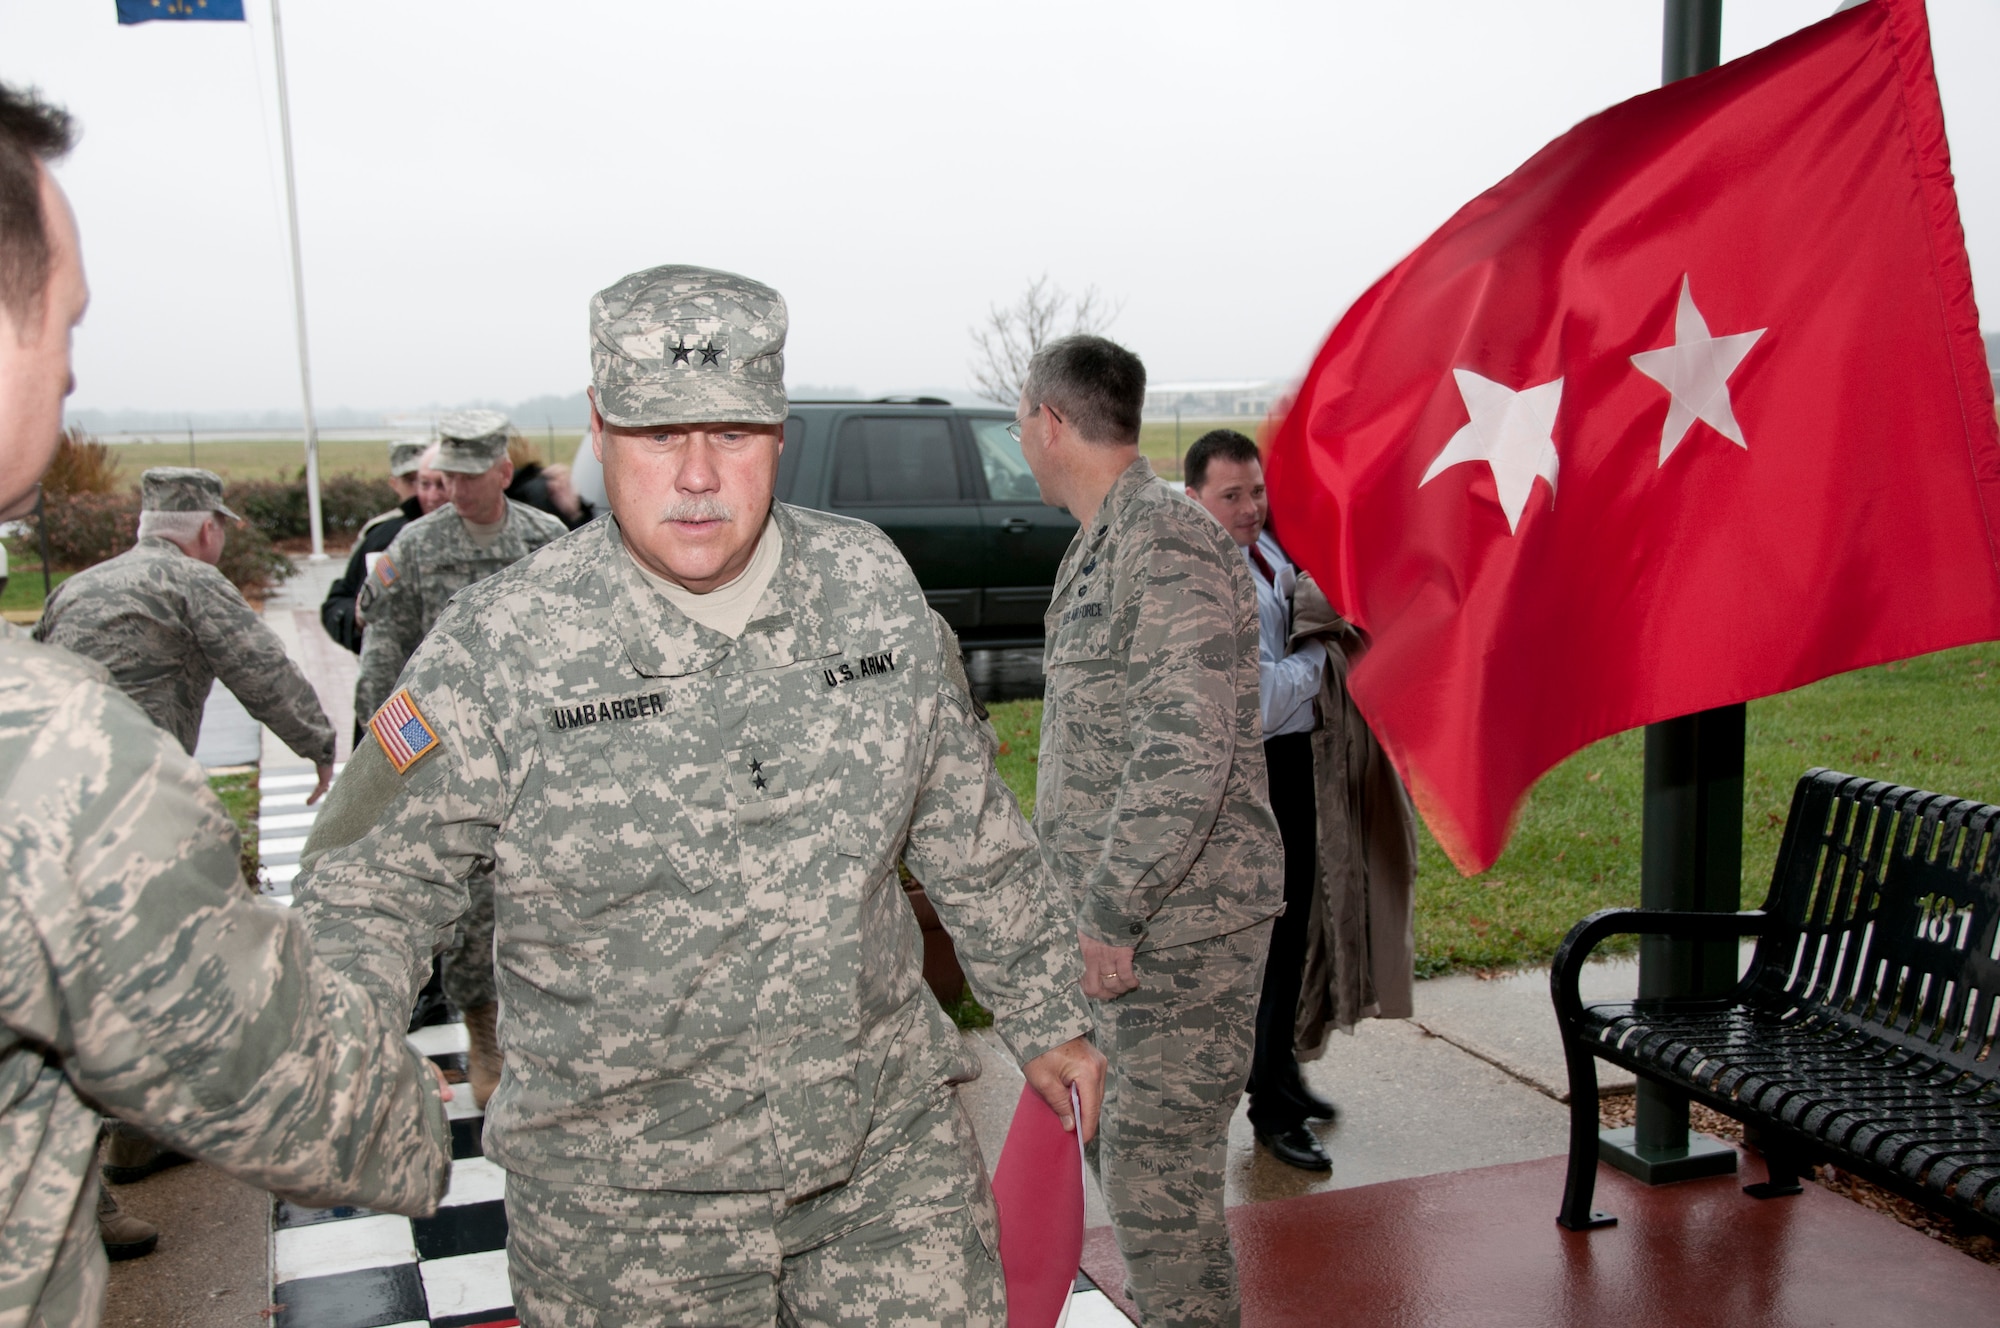 Hulman Field, Ind. – Maj. Gen. R. Martin Umbarger, The Adjutant General of Indiana, visited the 181st Intelligence Wing on December 5, 2011.  Photo by Senior Master Sergeant John S. Chapman